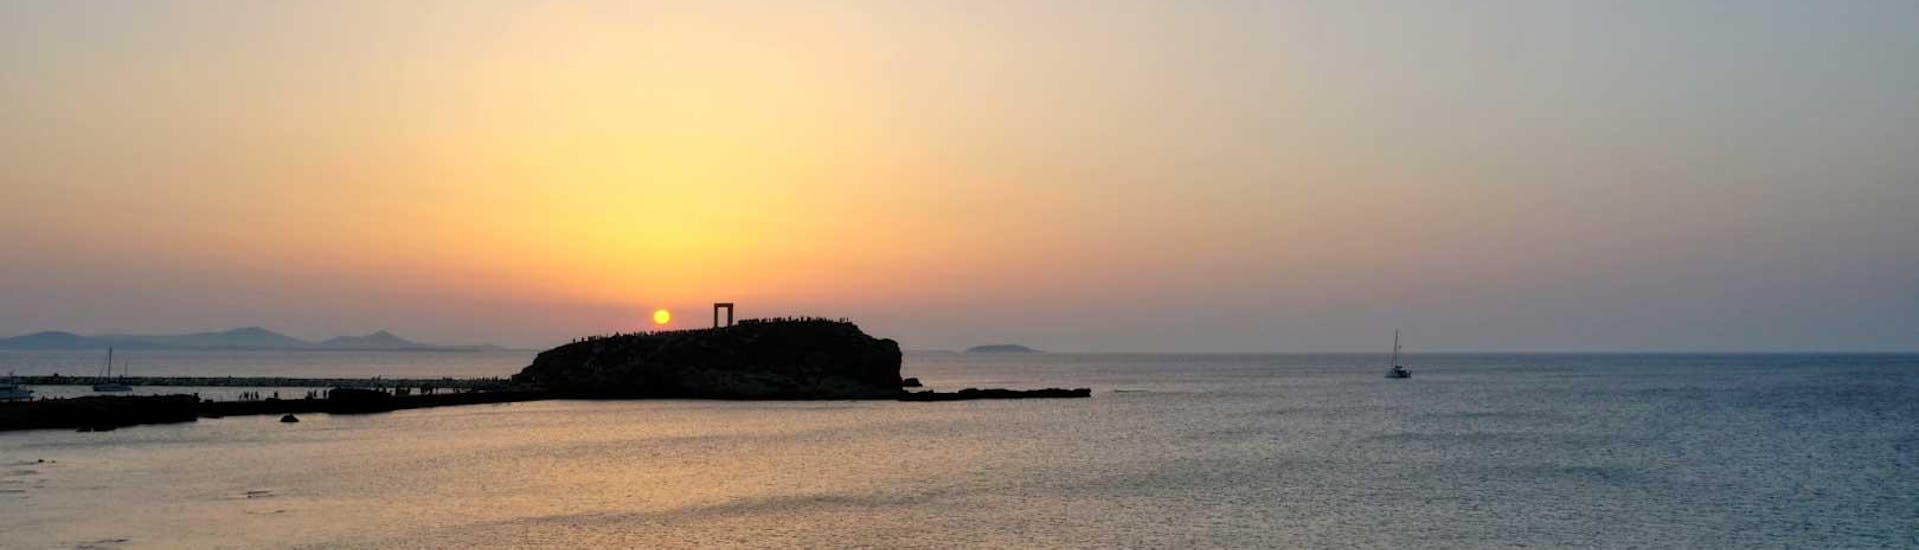 During the Private Sunset Sailing Cruise in Naxos with Naxos Catamaran, you can enjoy a wonderful view of the Apollon Temple in Naxos at sunset.